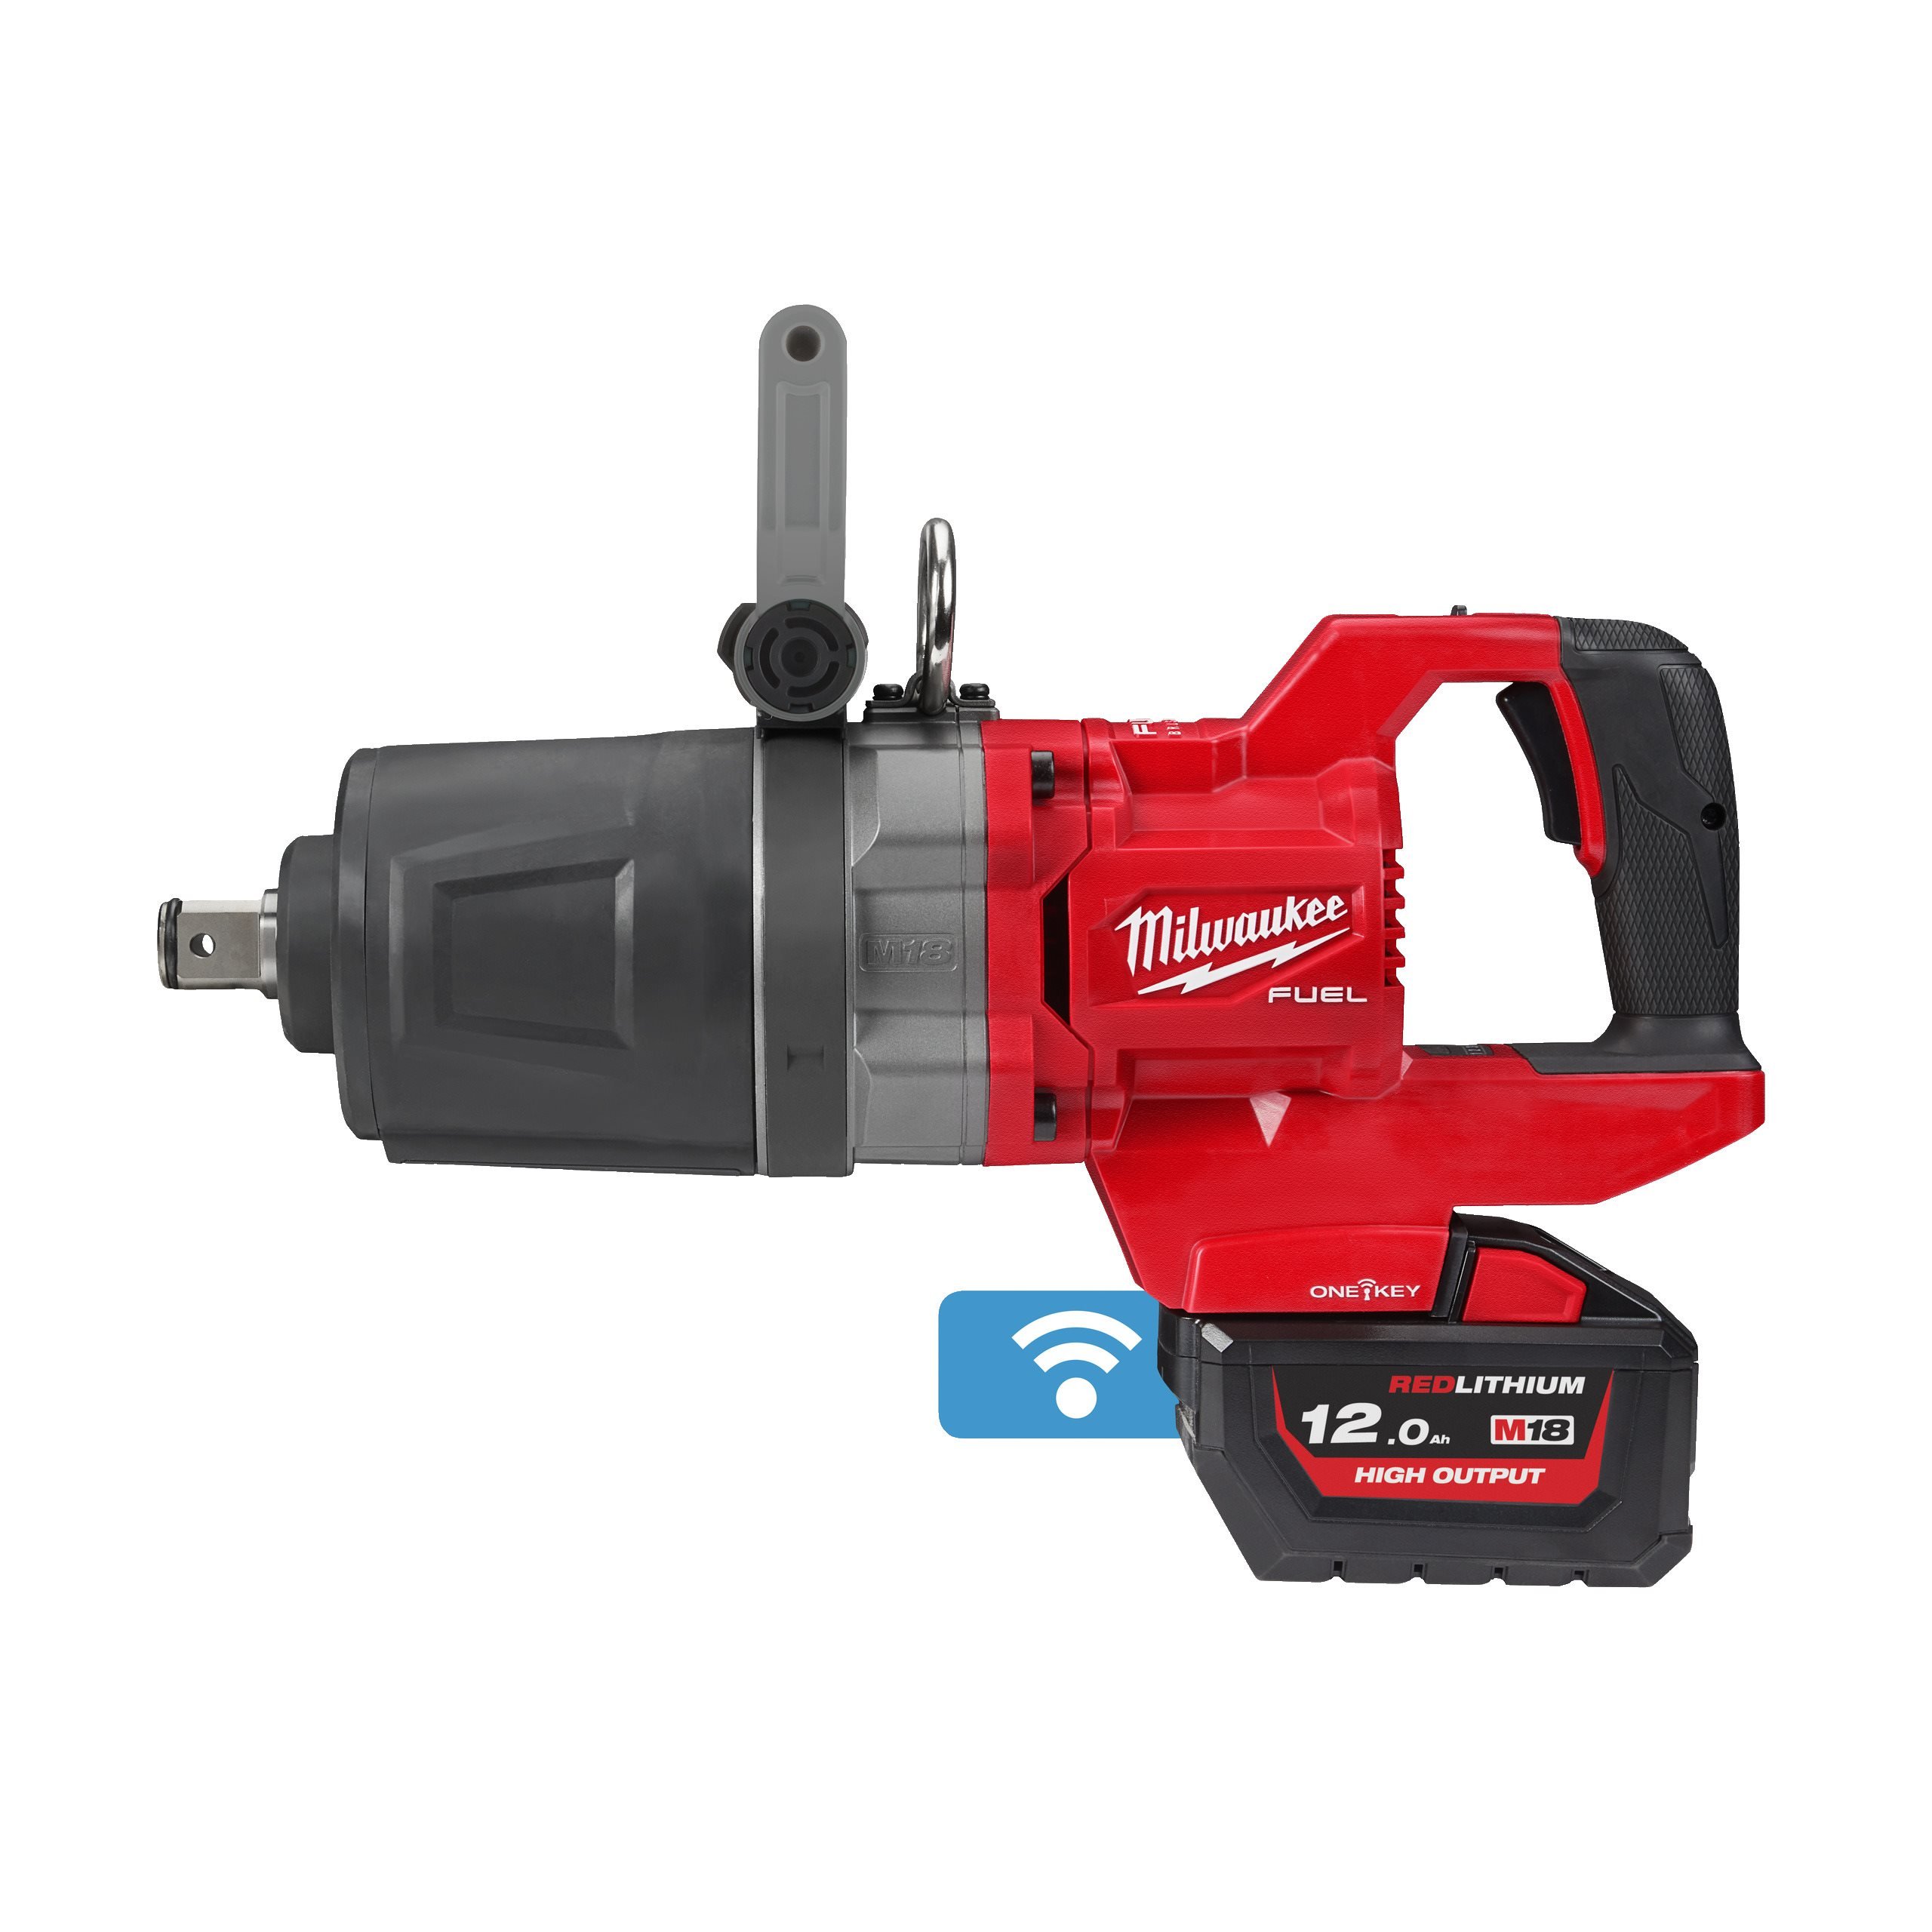 Milwaukee Tool 0779-22 28v Impact Wrench Kit for sale online 